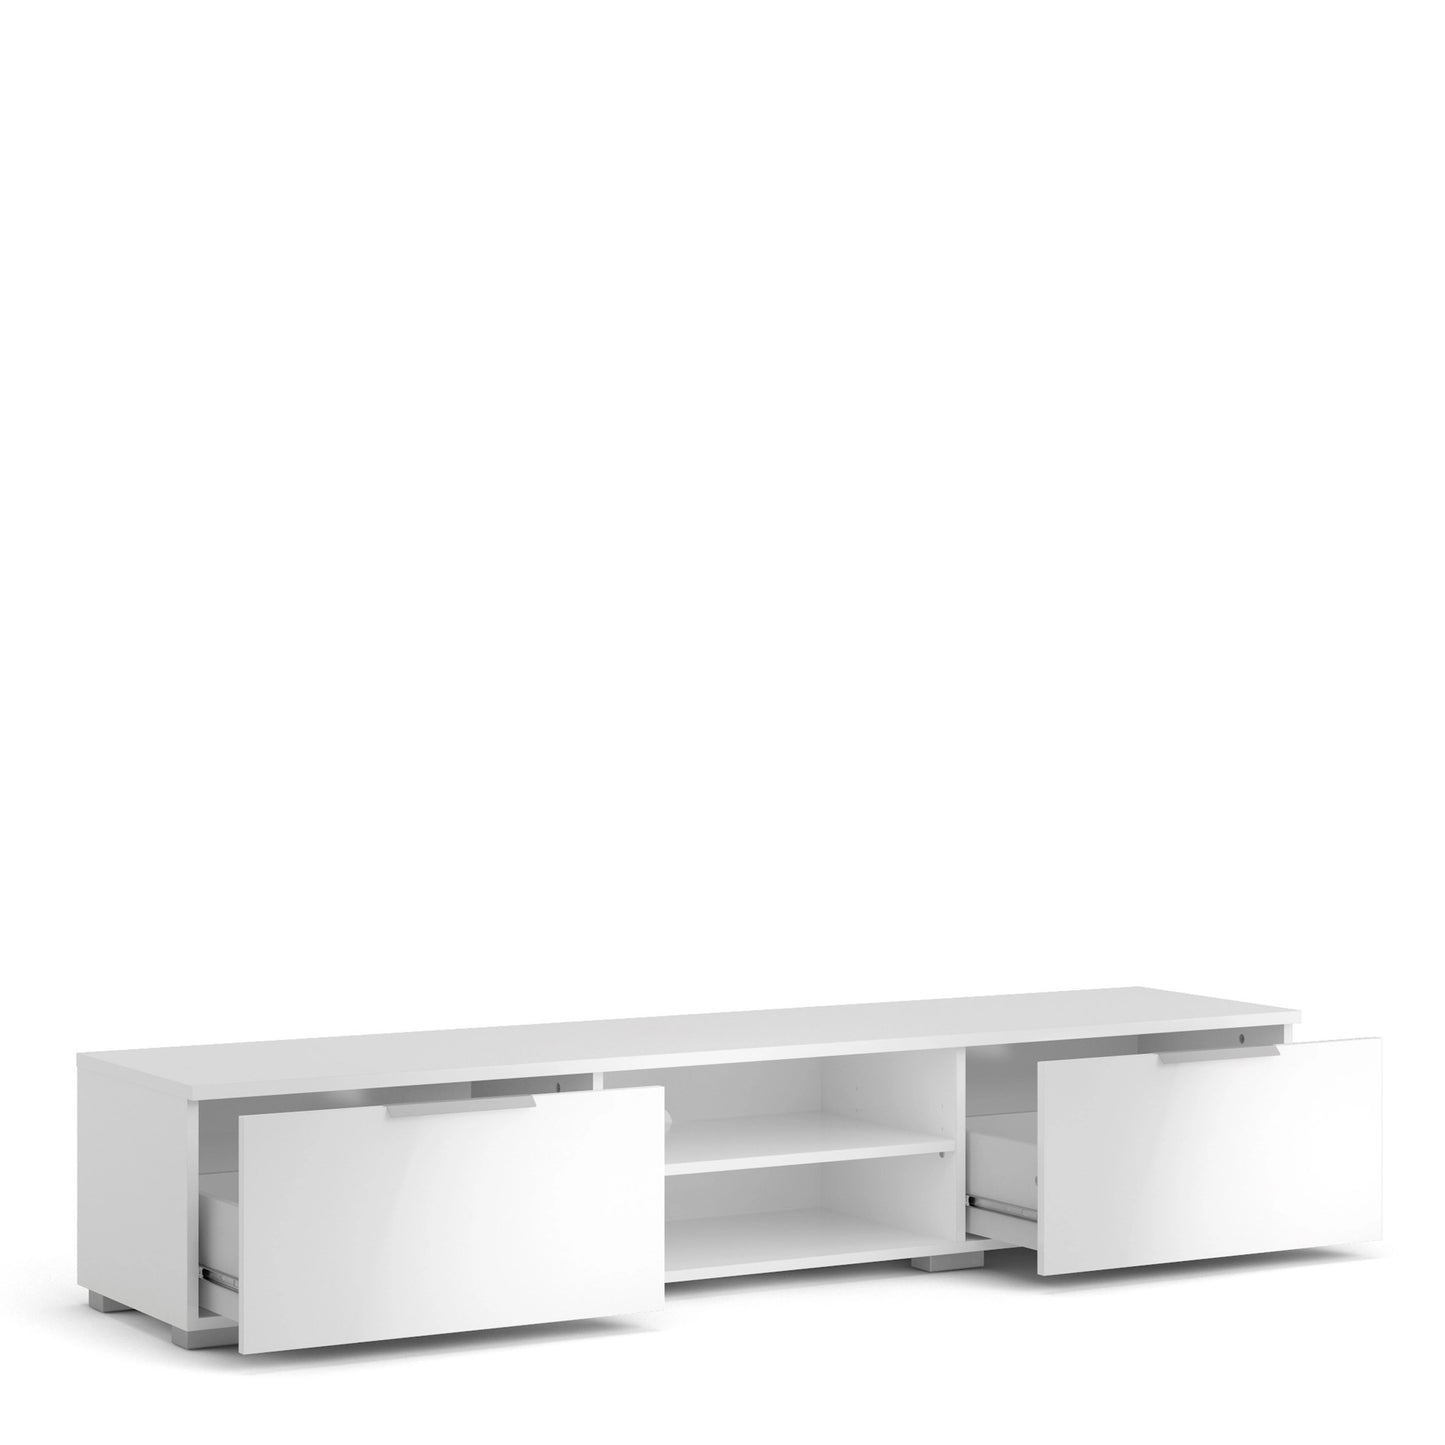 Furniture To Go Match TV Unit 2 Drawers 2 Shelf in White High Gloss